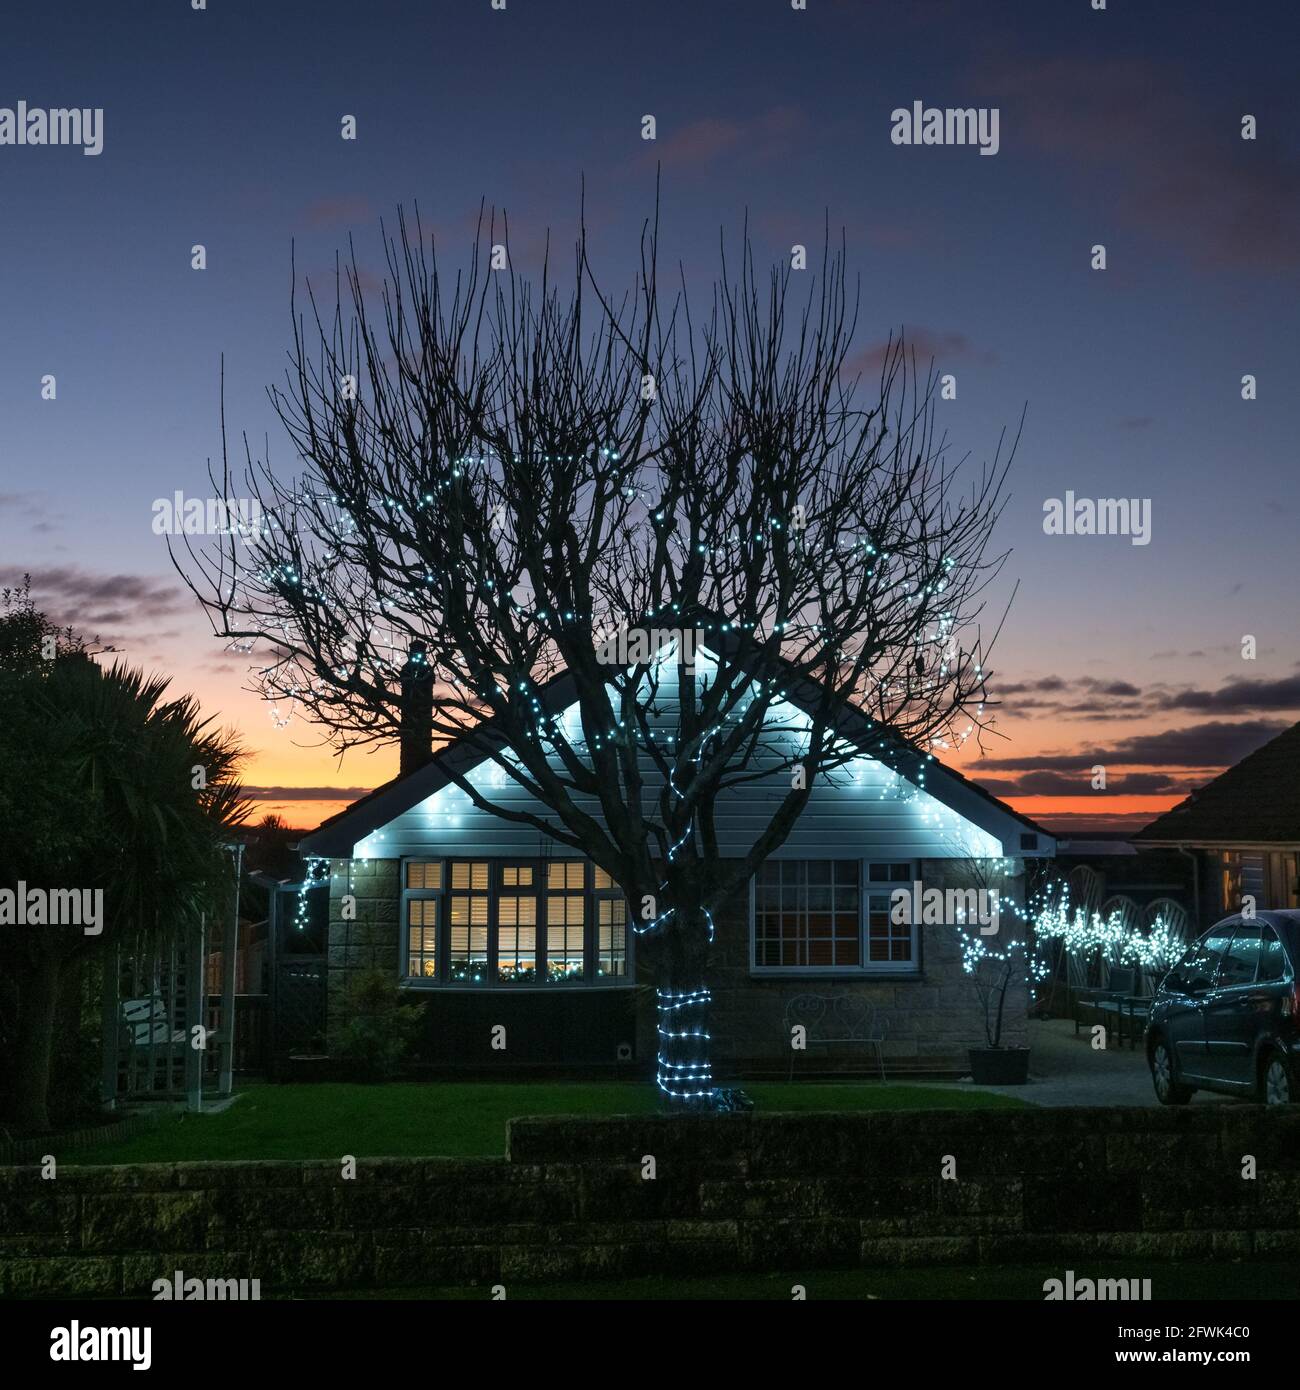 A front elevation view of blue Christmas lights in eaves of a bungalow house home and hanging in tree silhousette with sunset in blue sky as backdrop Stock Photo